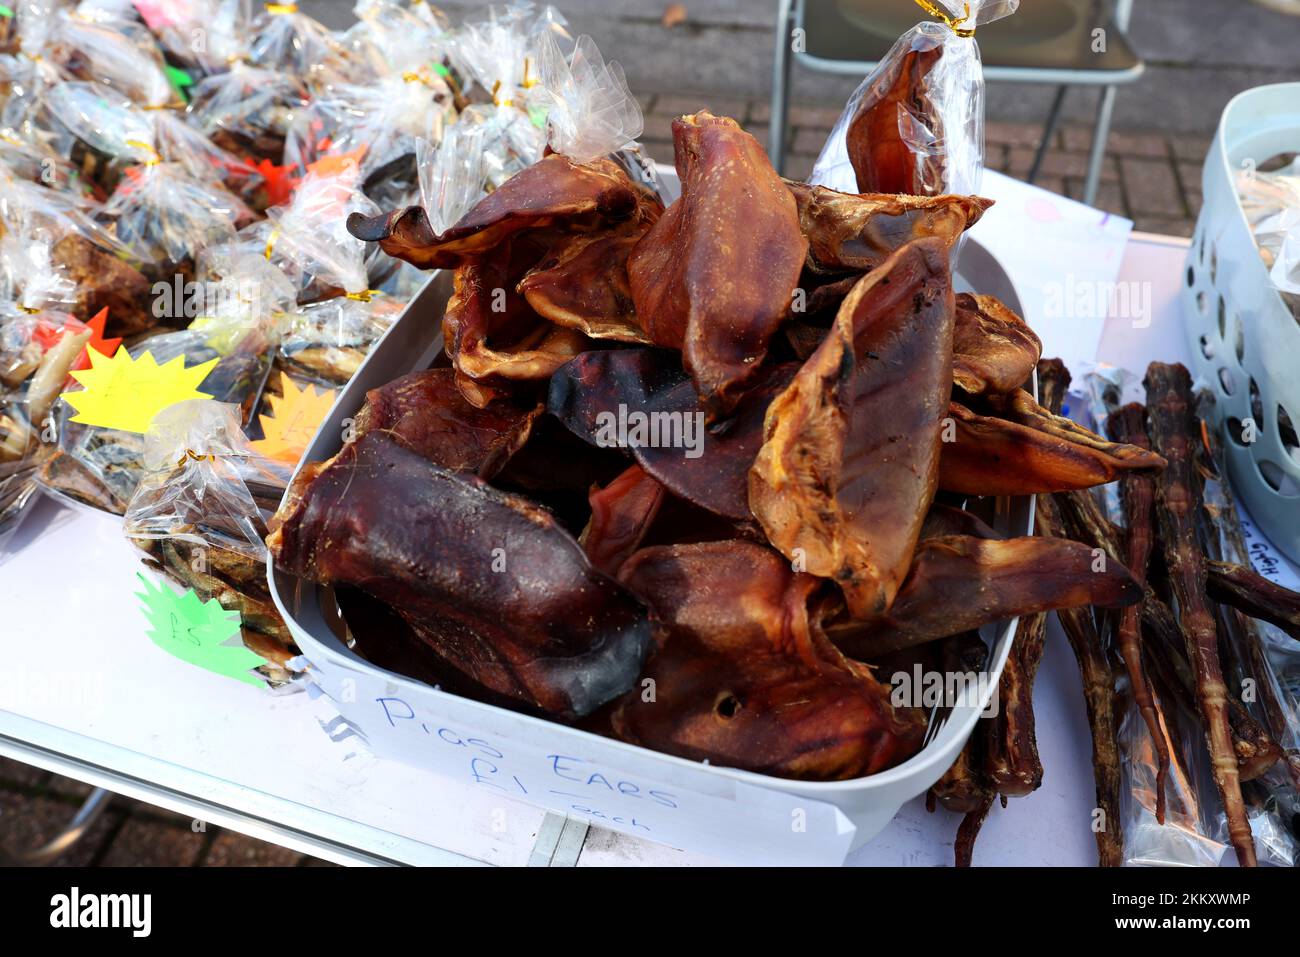 Pigs ears for sale on a market stall in Lee-on-Solent, Hampshire, UK. Stock Photo